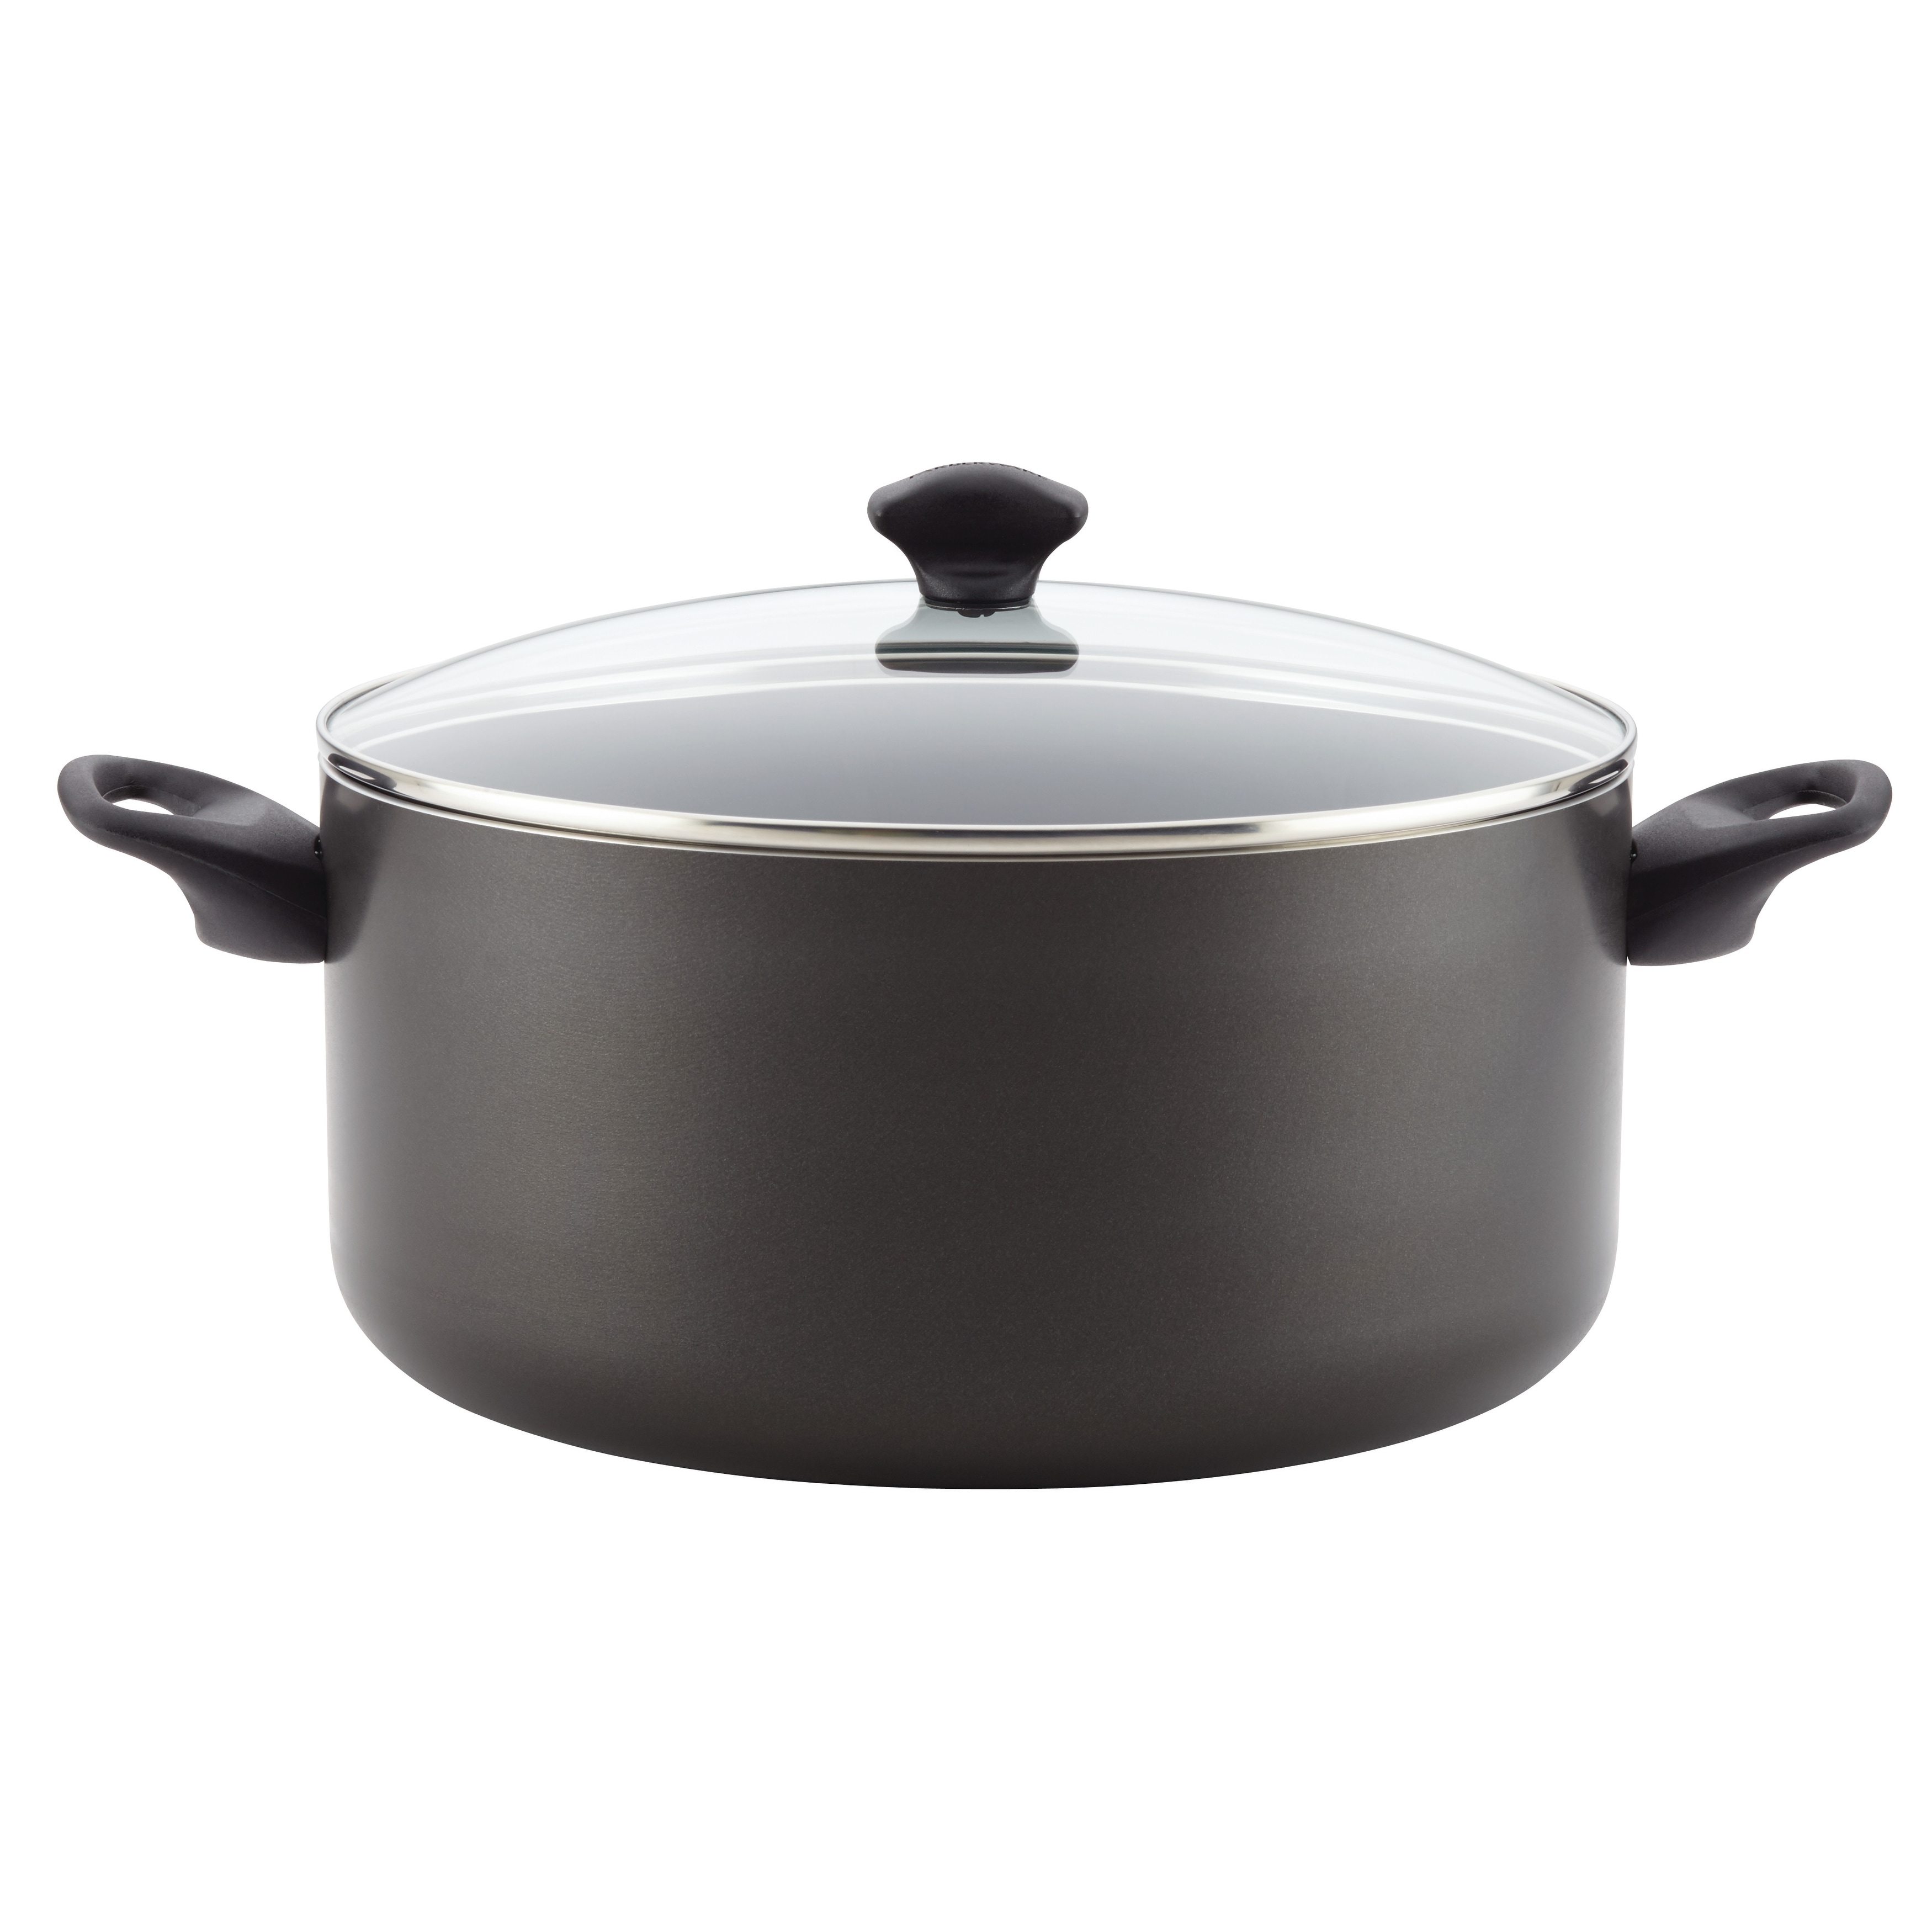 https://ak1.ostkcdn.com/images/products/is/images/direct/0044a3457ff6d20c74a528dcdab54adda8bb6488/Farberware-Dishwasher-Safe-Aluminum-Nonstick-Stockpot-with-Lid%2C-10.5-Quart%2C-Black.jpg